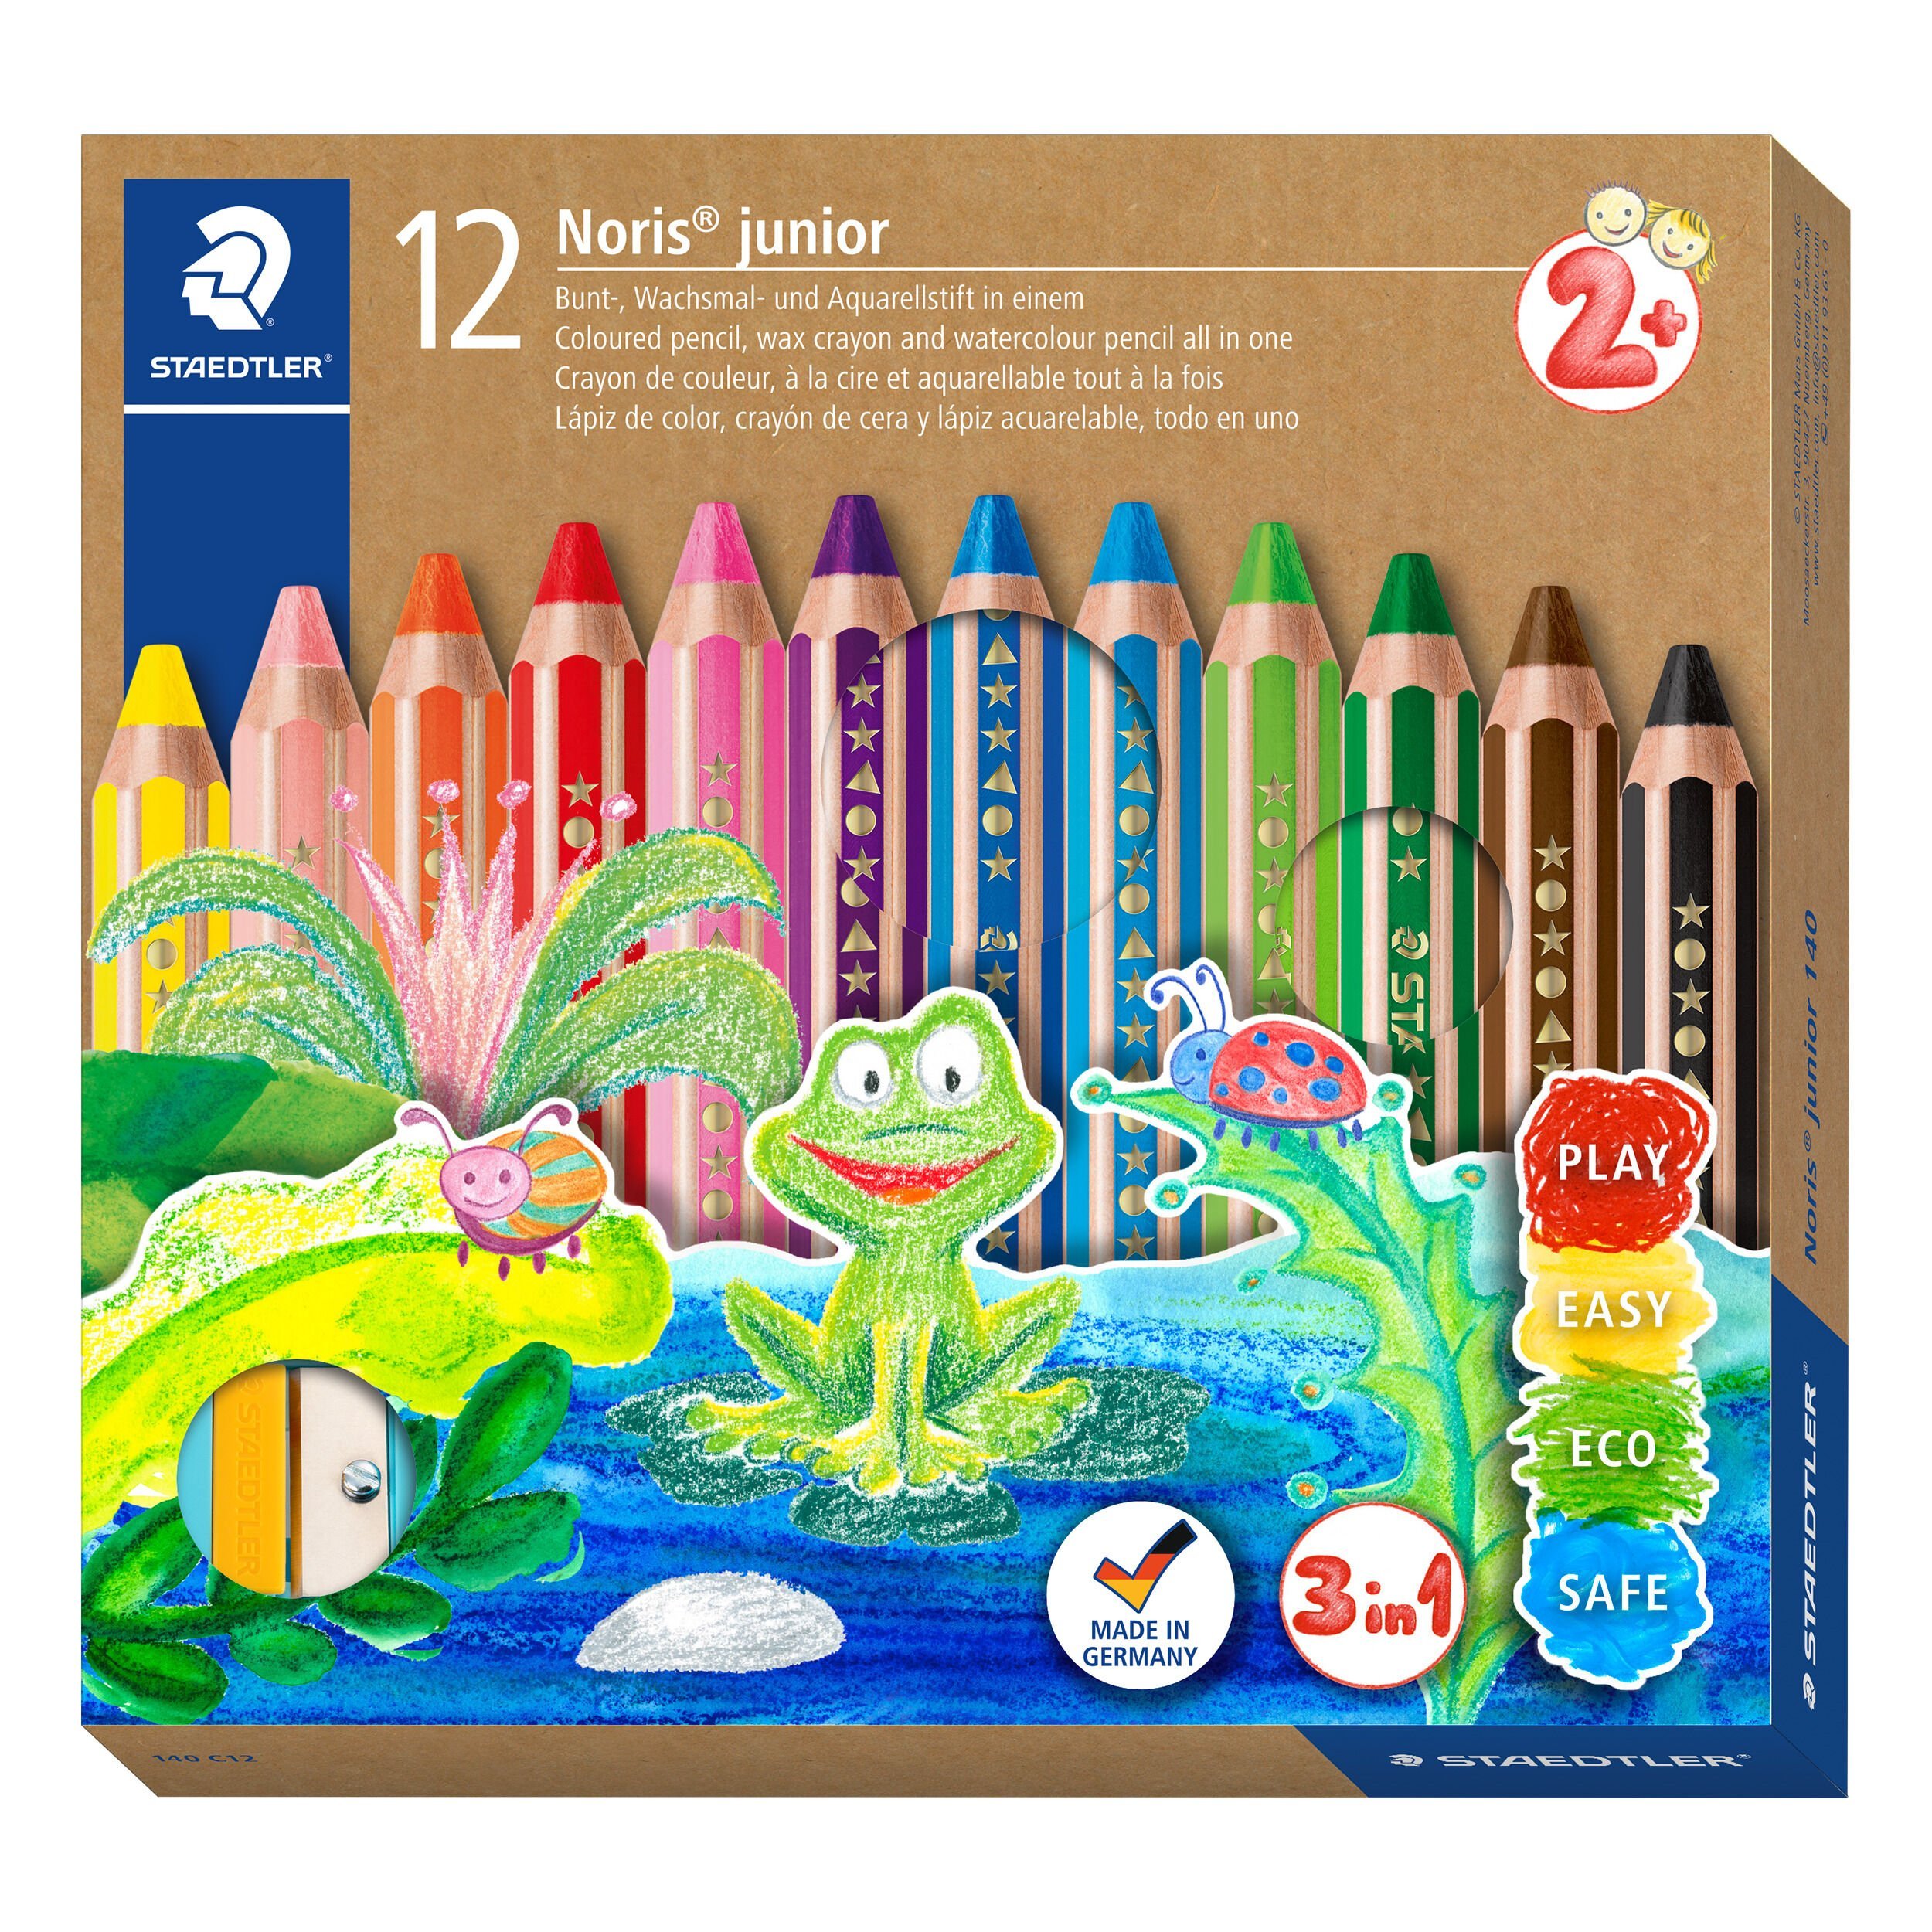 STAEDTLER 224 C12 Noris junior childrens thick wax crayons pack of 12 assorted colours in cardboard box 